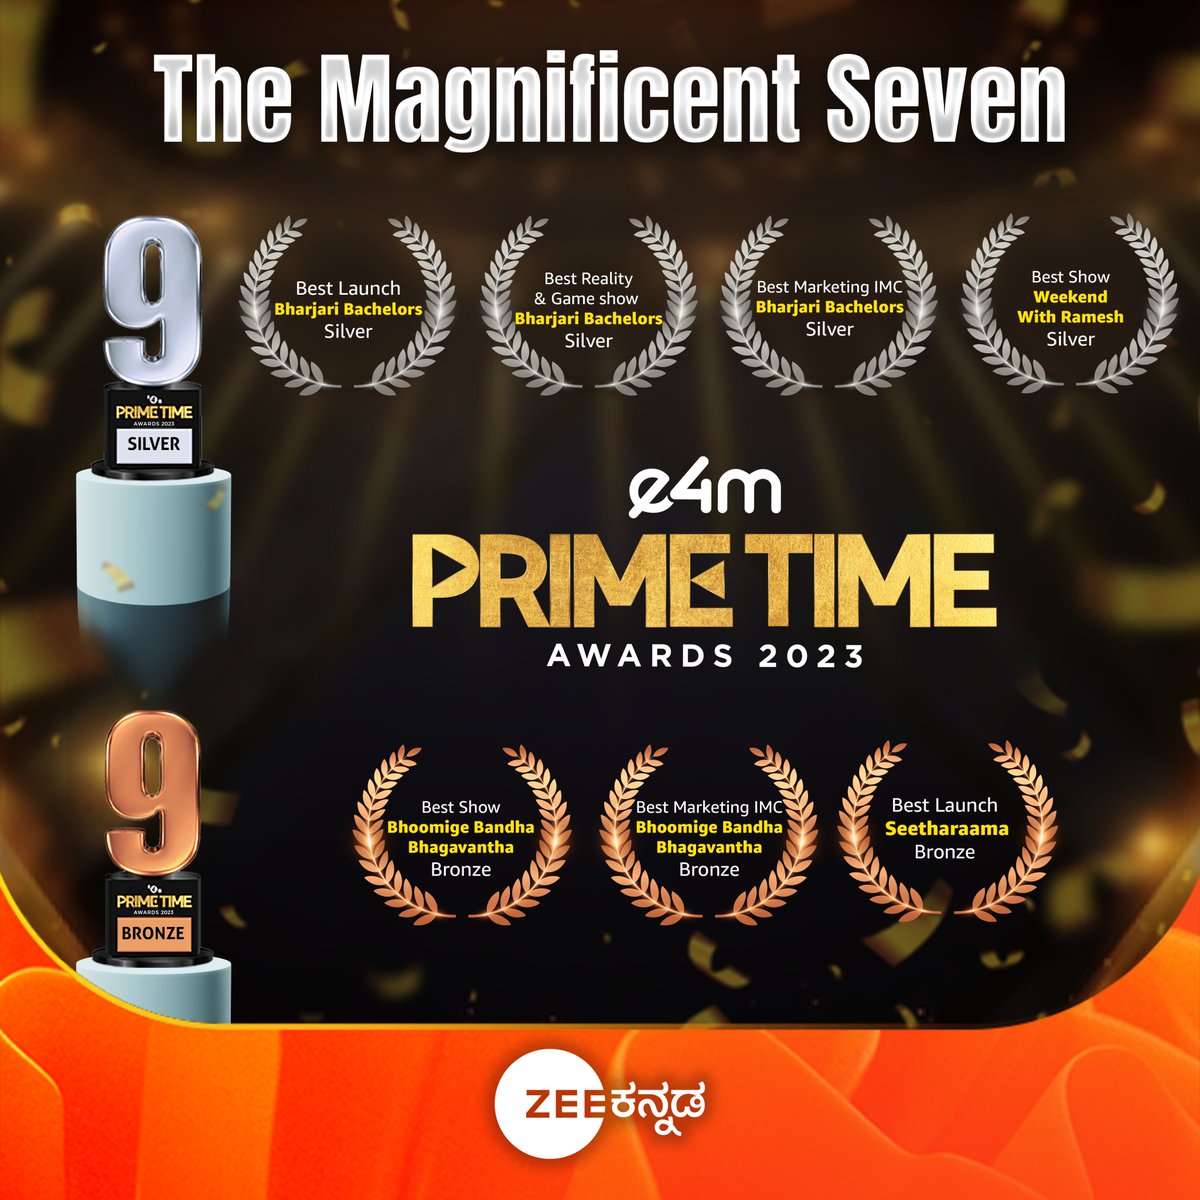 ZEE Kannada Sweeps e4m PRIME TIME Awards-2023 Broadcasters with 4 Silver and 3 Bronze Medals for Their Hit Shows!
Congratulations to the respective teams!
#e4mAwards #PrimeTimeAwards #e4mPrimeTimeAwards2023 #ZeeKannada #BBB #BharjariBachelors #SR #WWR #BayasidaBaagiluTegeyona